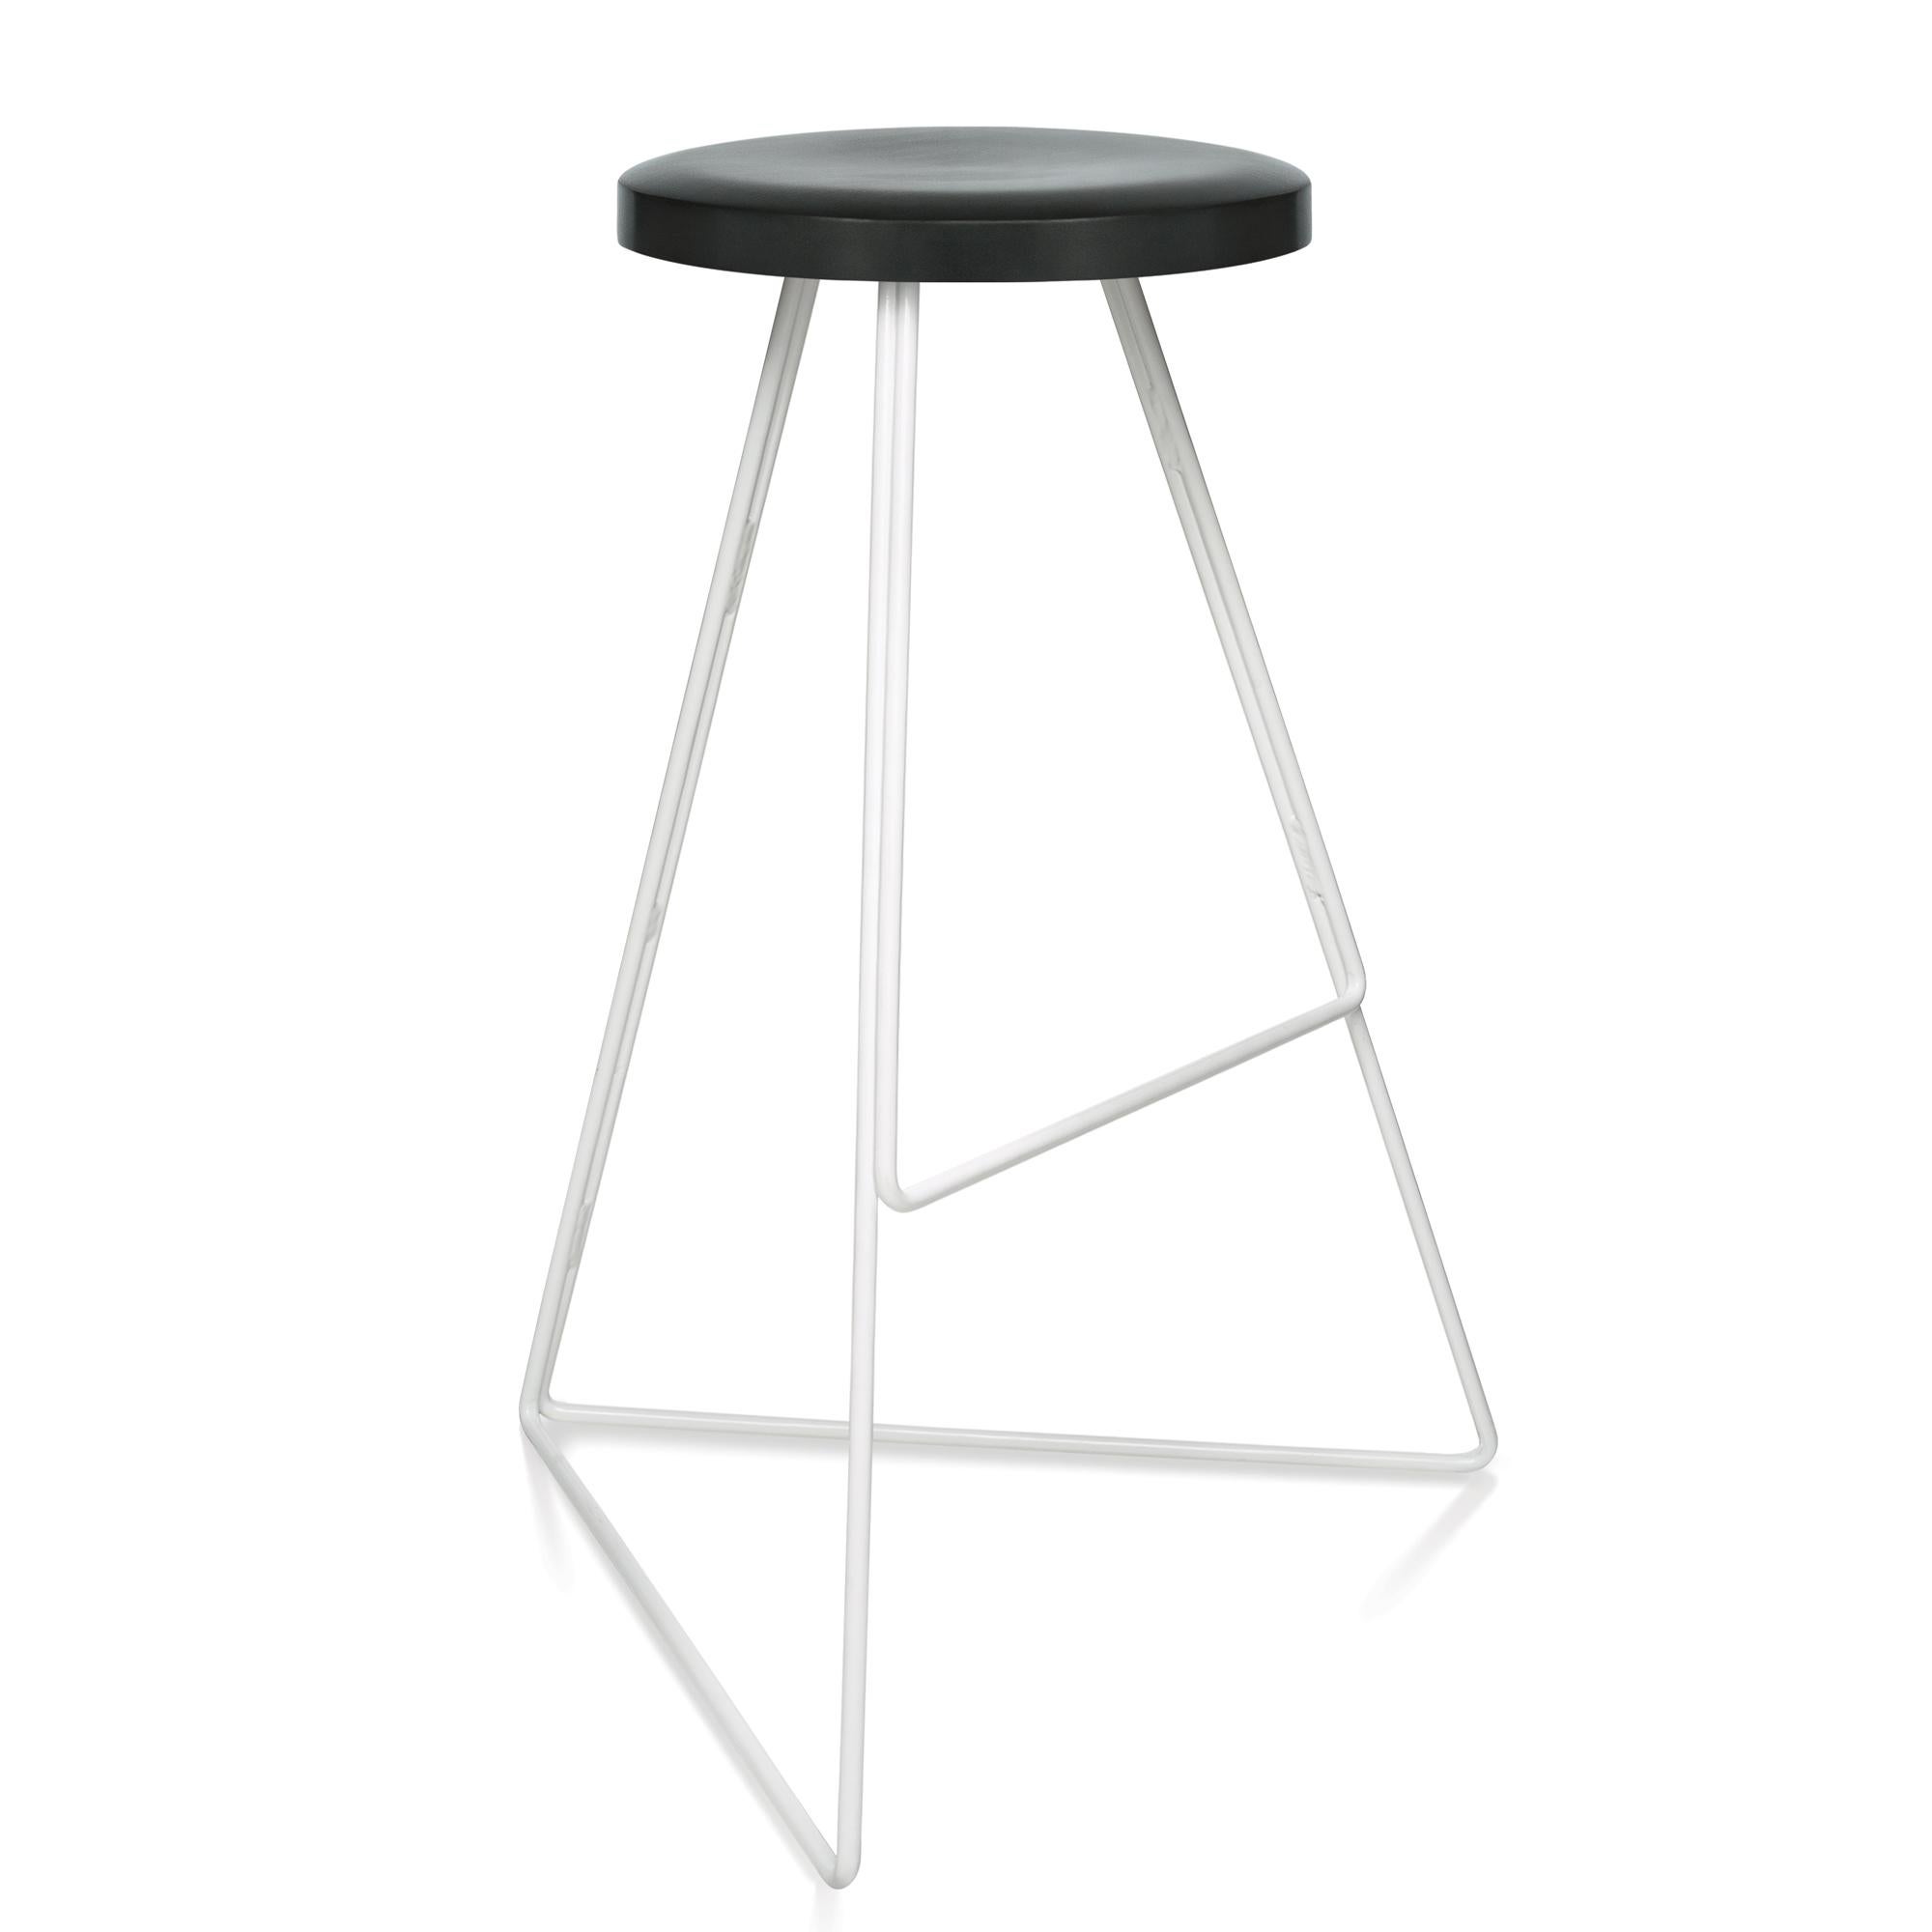 Modern Coleman Stool, White and Charcoal, Counter Height For Sale